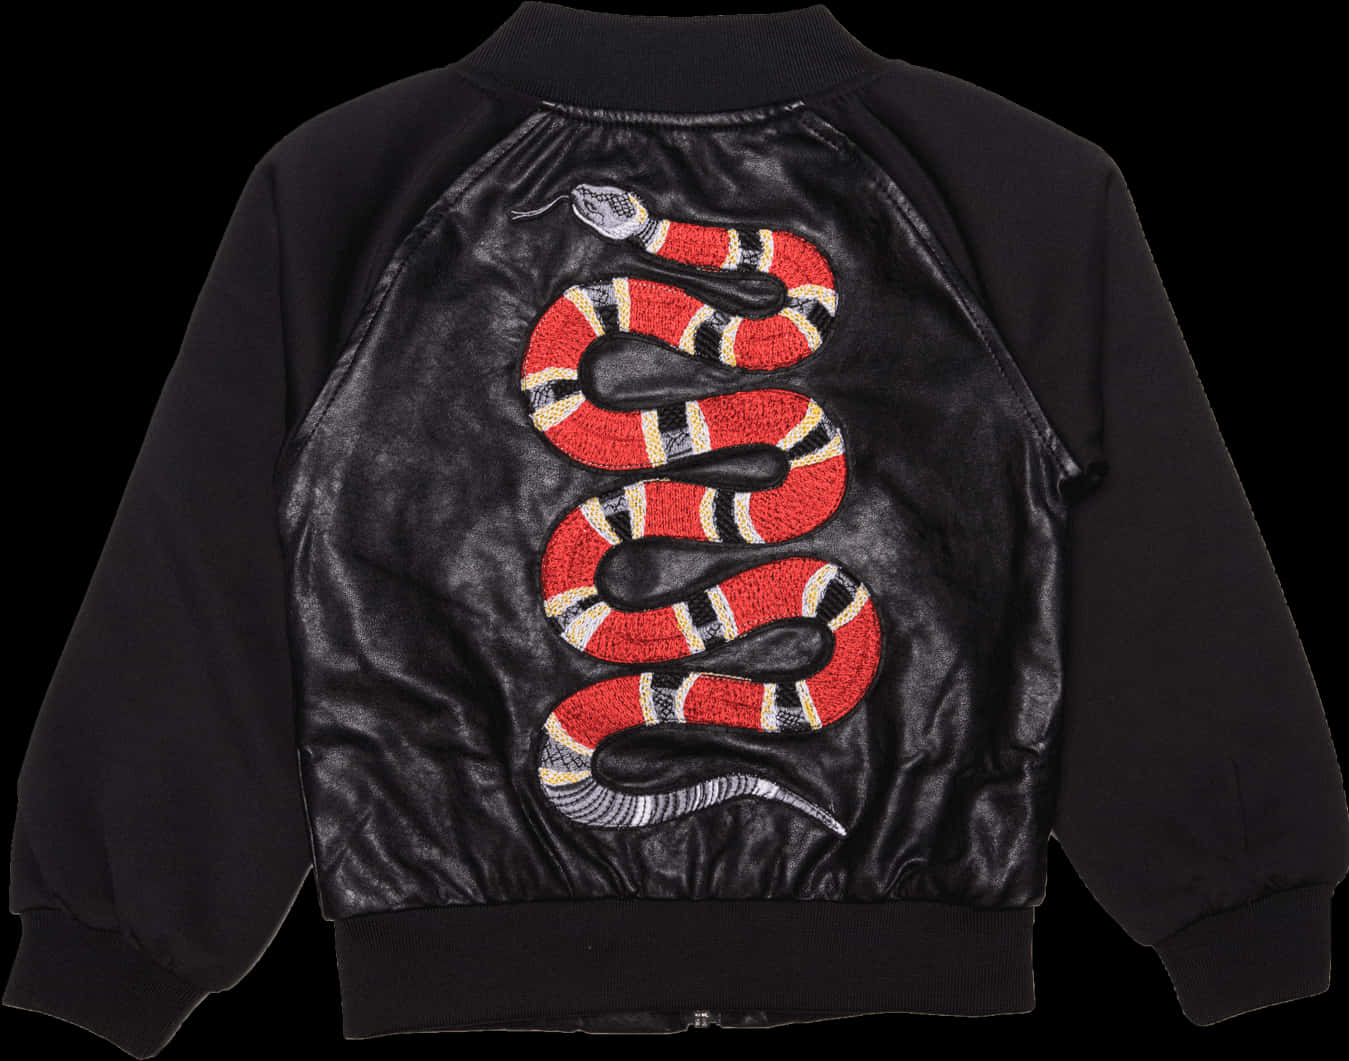 Gucci Embroidered Snake Leather Jacket PNG image